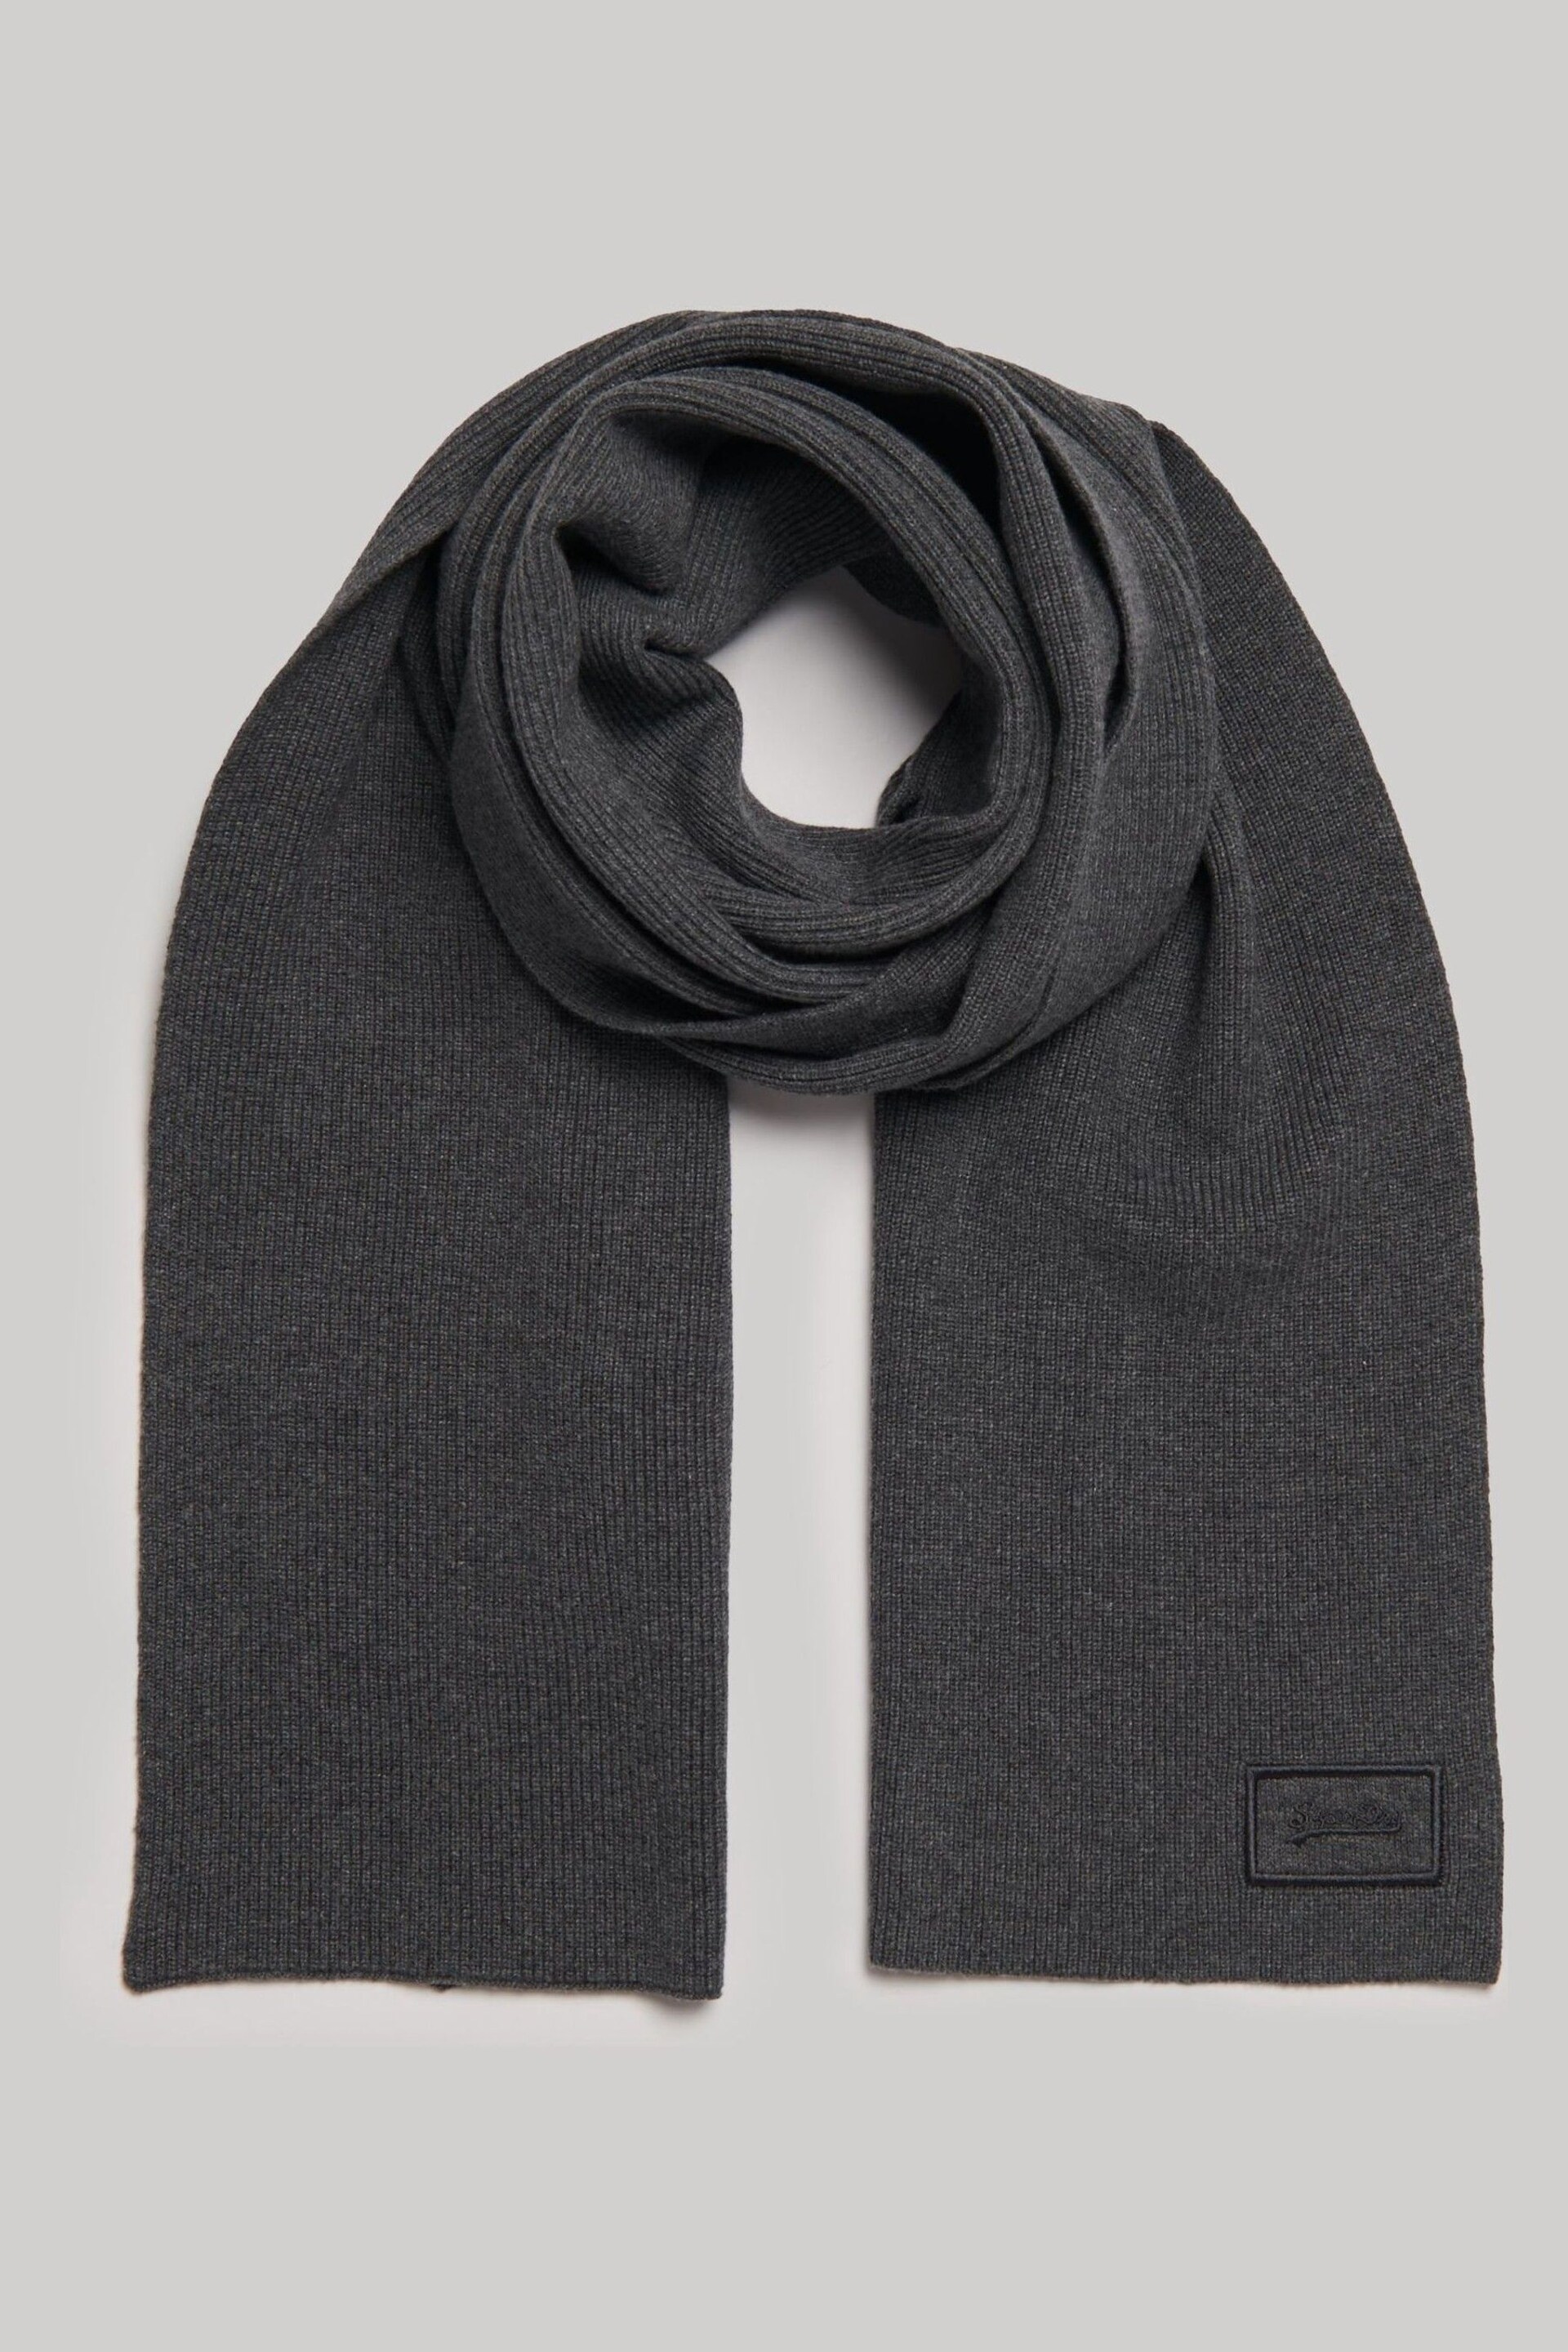 Superdry Grey Knitted Logo Scarf - Image 2 of 4